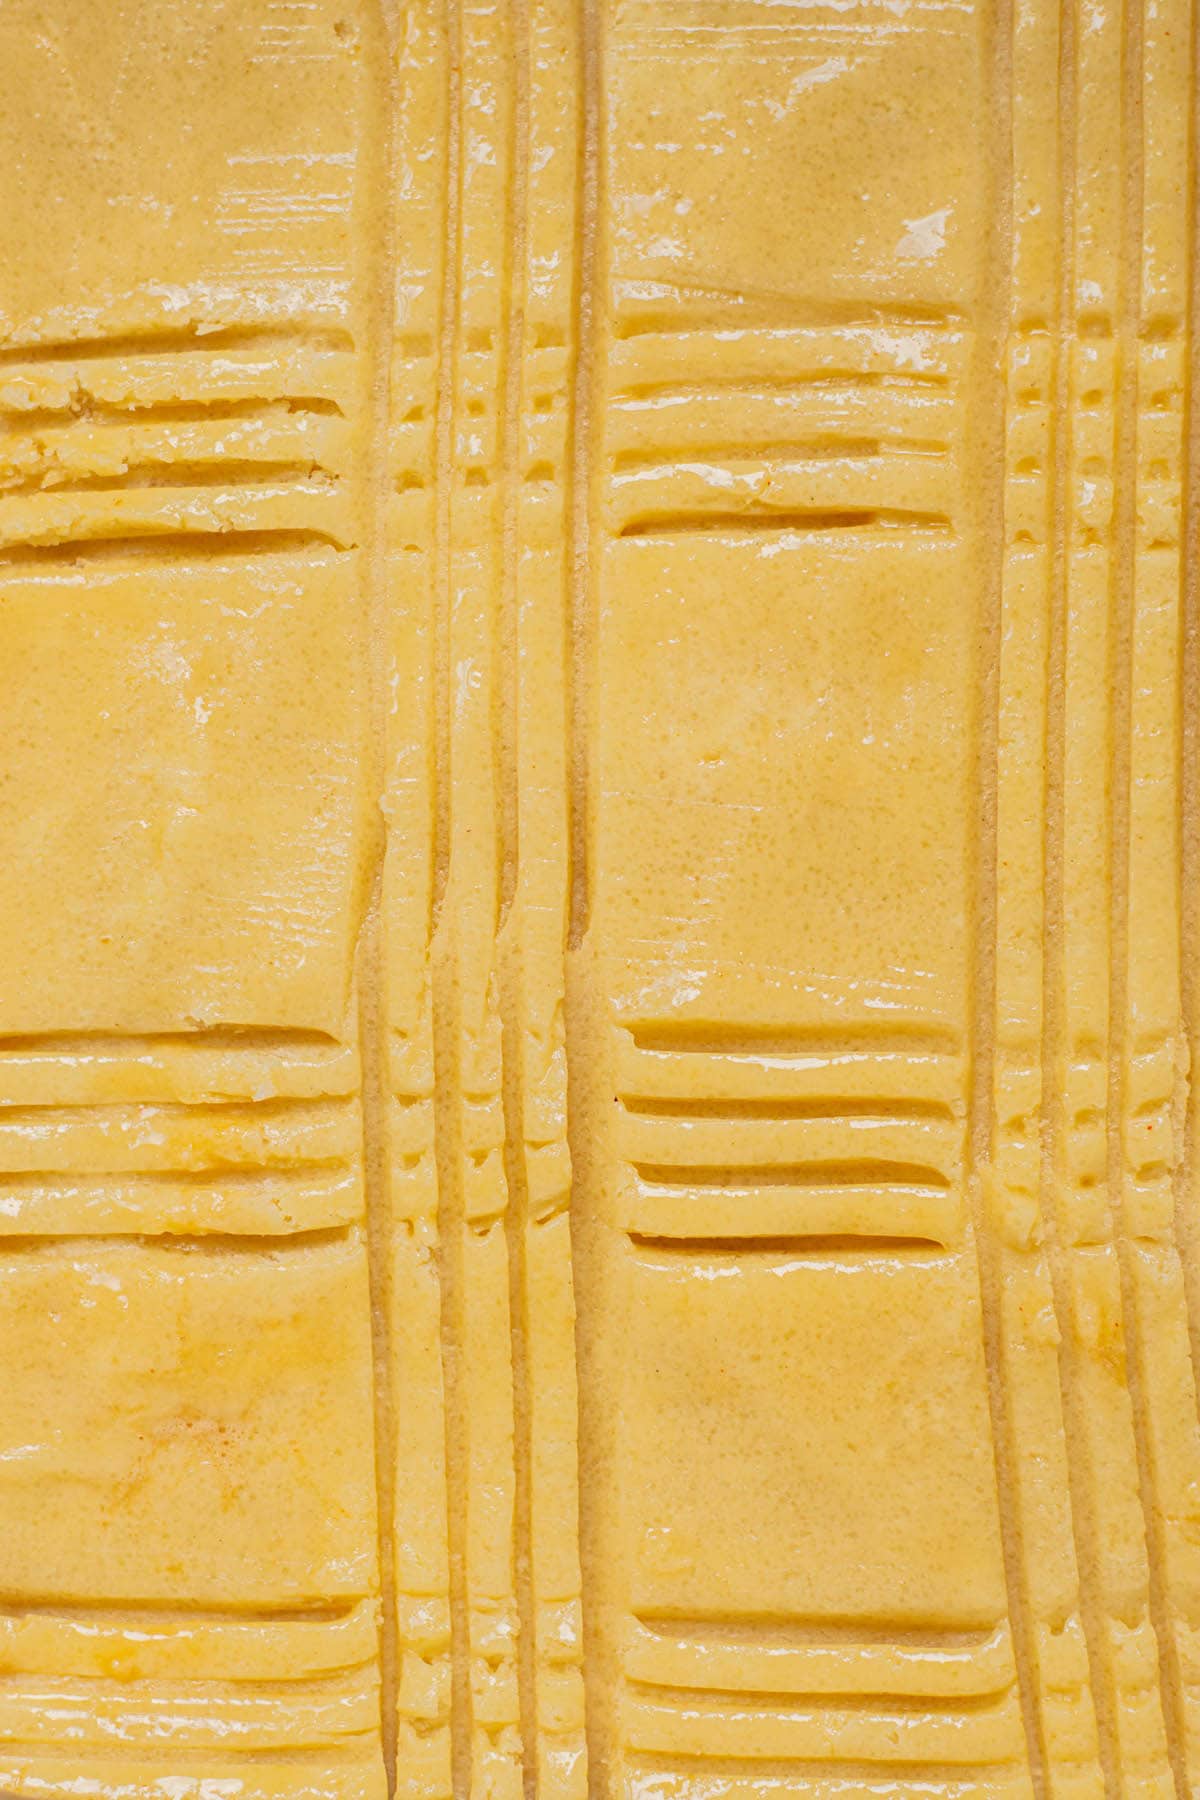 tines of fork stripes in buttery dough.